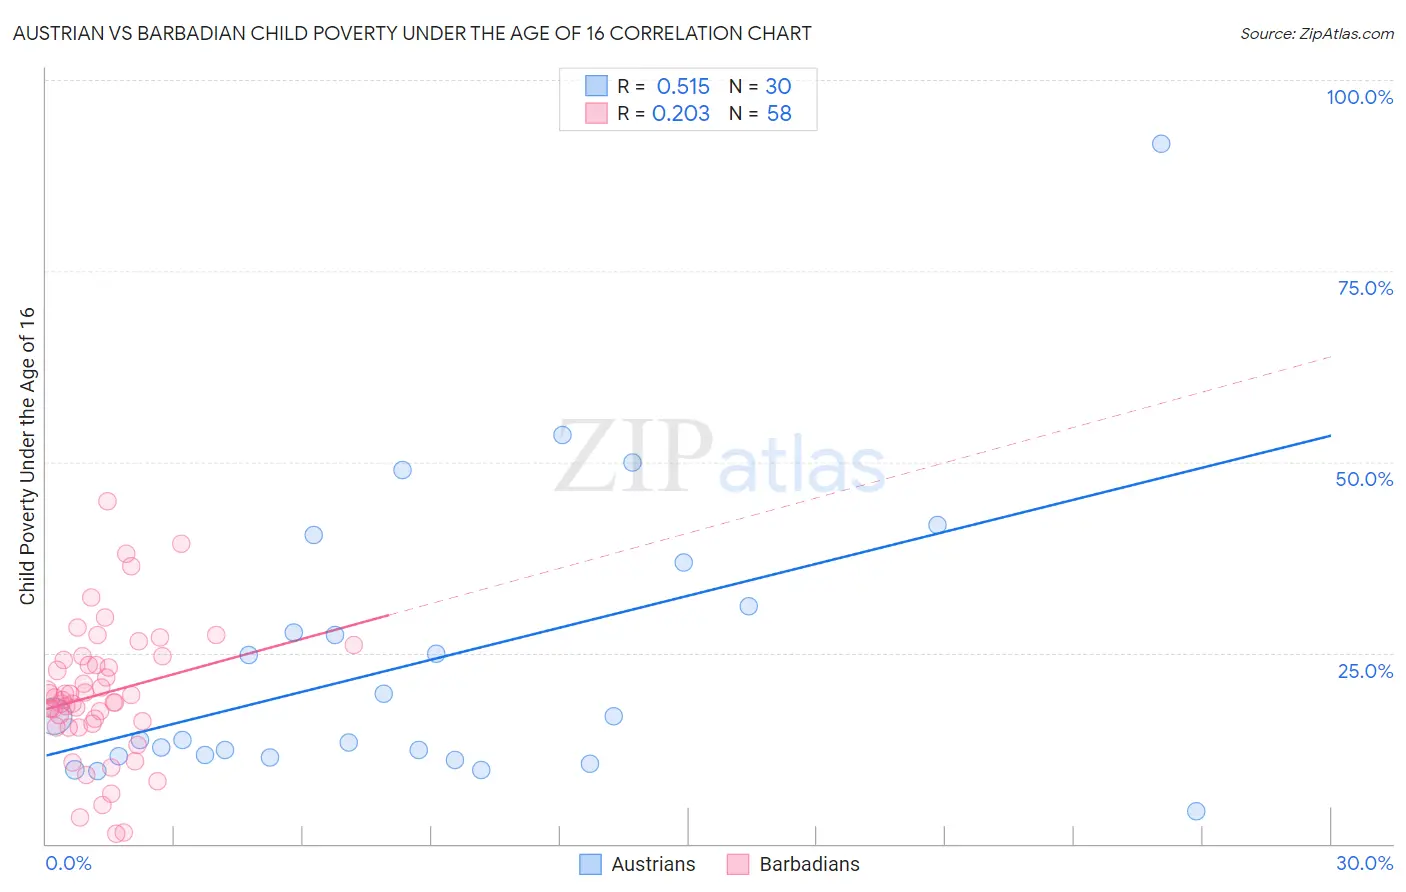 Austrian vs Barbadian Child Poverty Under the Age of 16